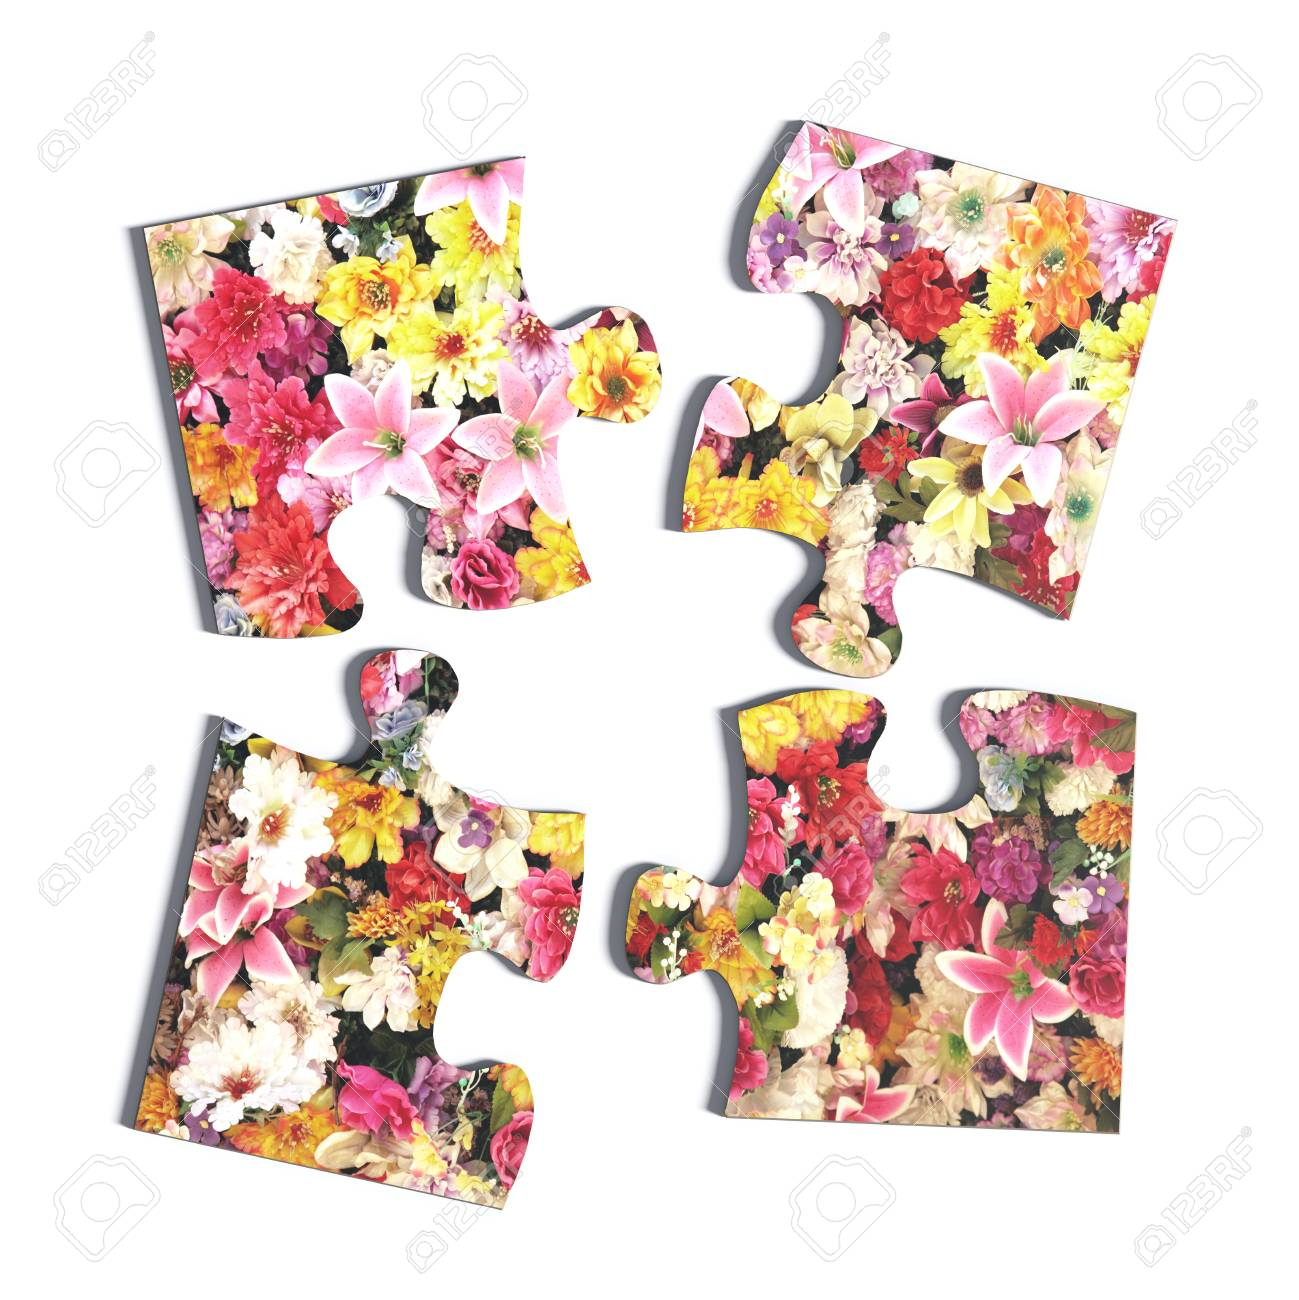 3D Rendering Of Four Puzzle Pieces With Flower Print On White - Print On Puzzle